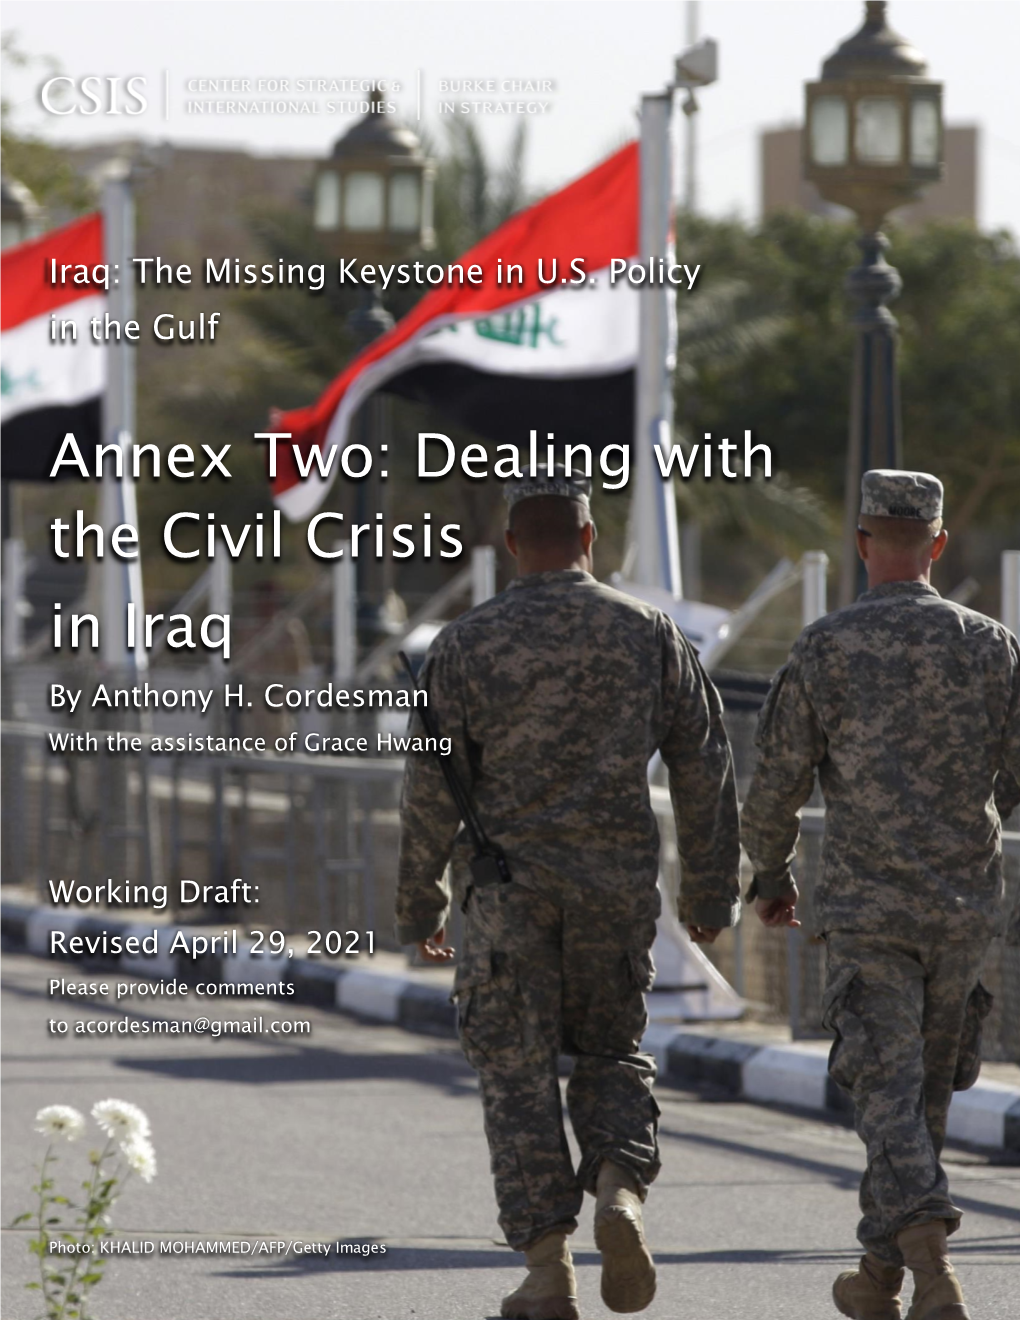 Annex Two: Dealing with the Civil Crisis in Iraq by Anthony H